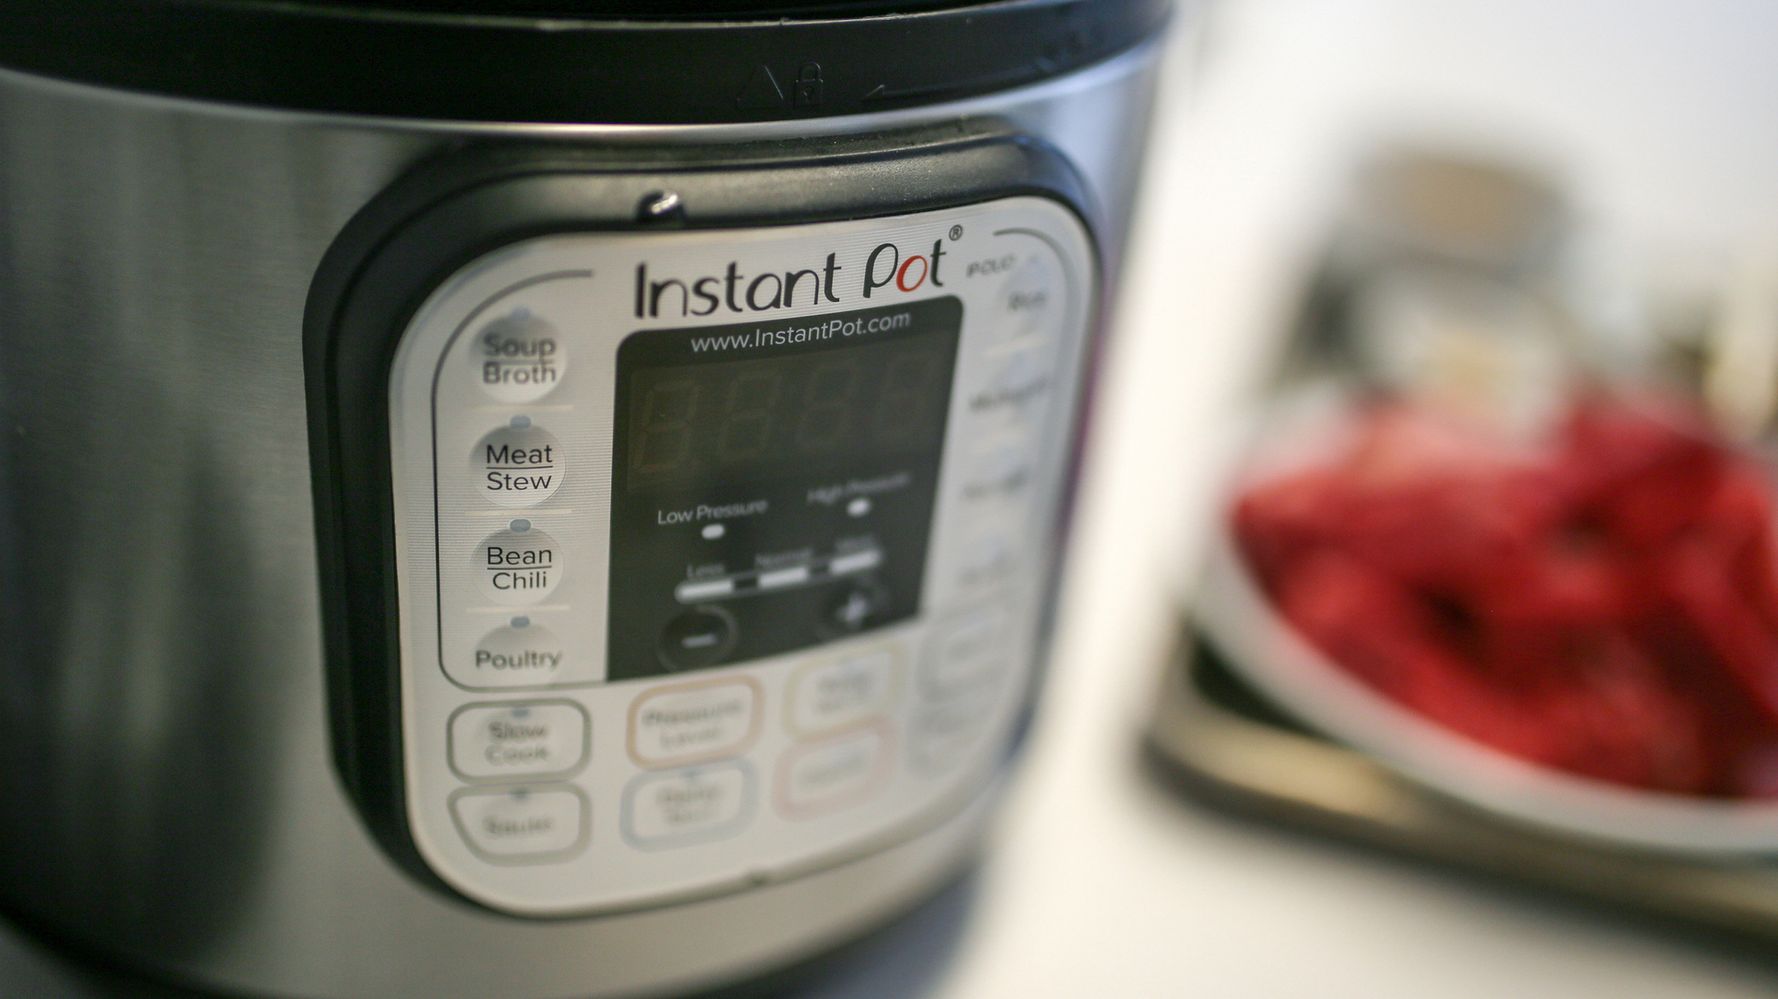 These Black Friday 2020 Instant Pot Deals Are Sizzling